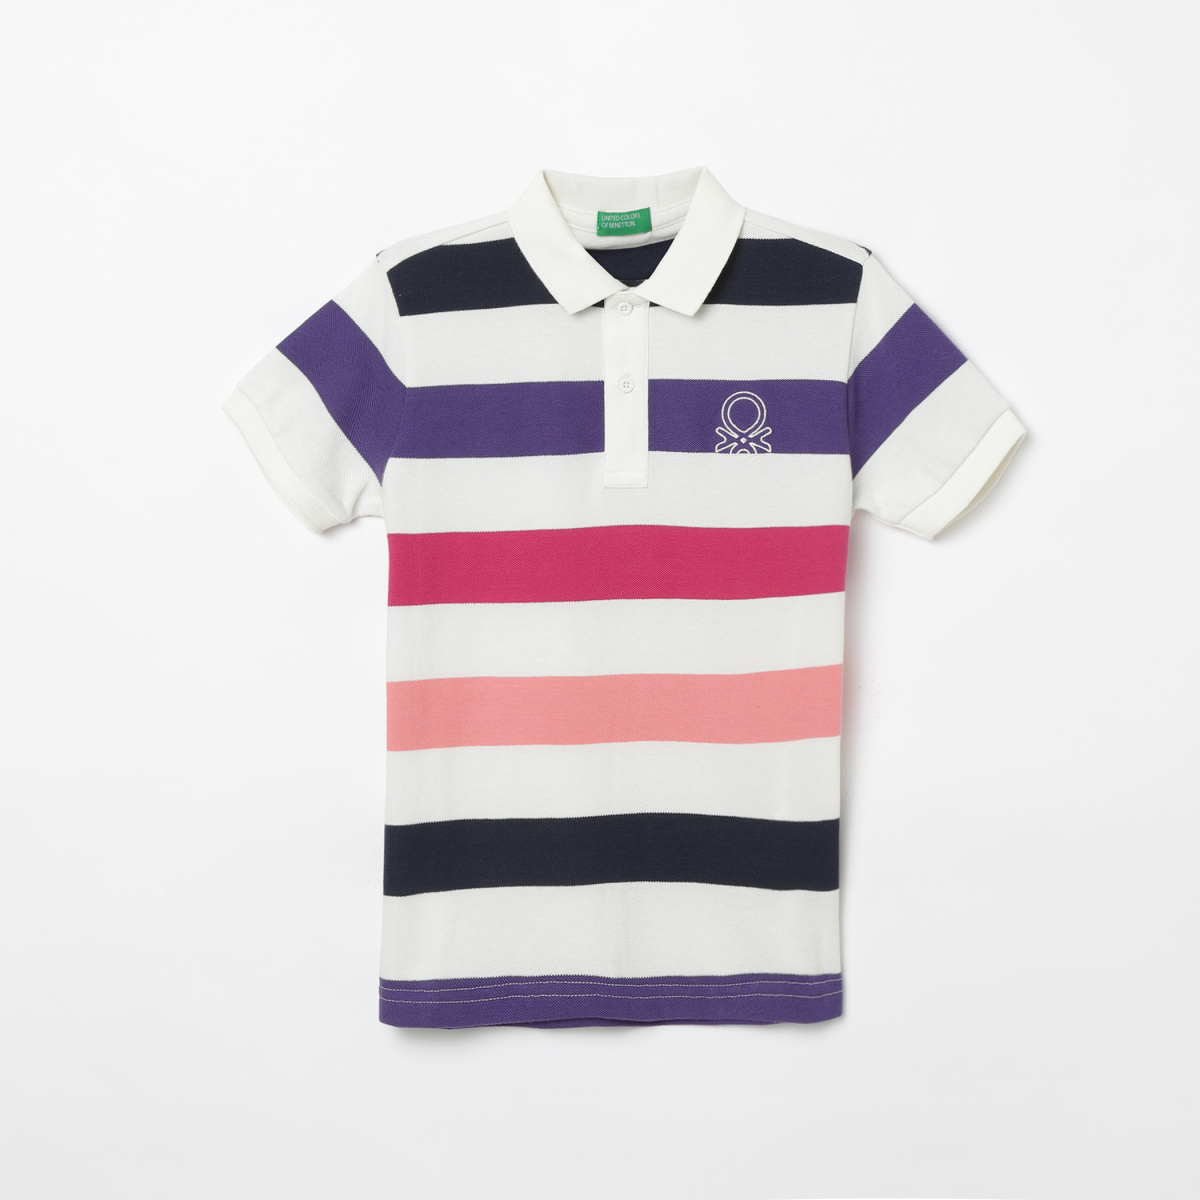 UNITED COLORS OF BENETTON Striped Polo T-shirt